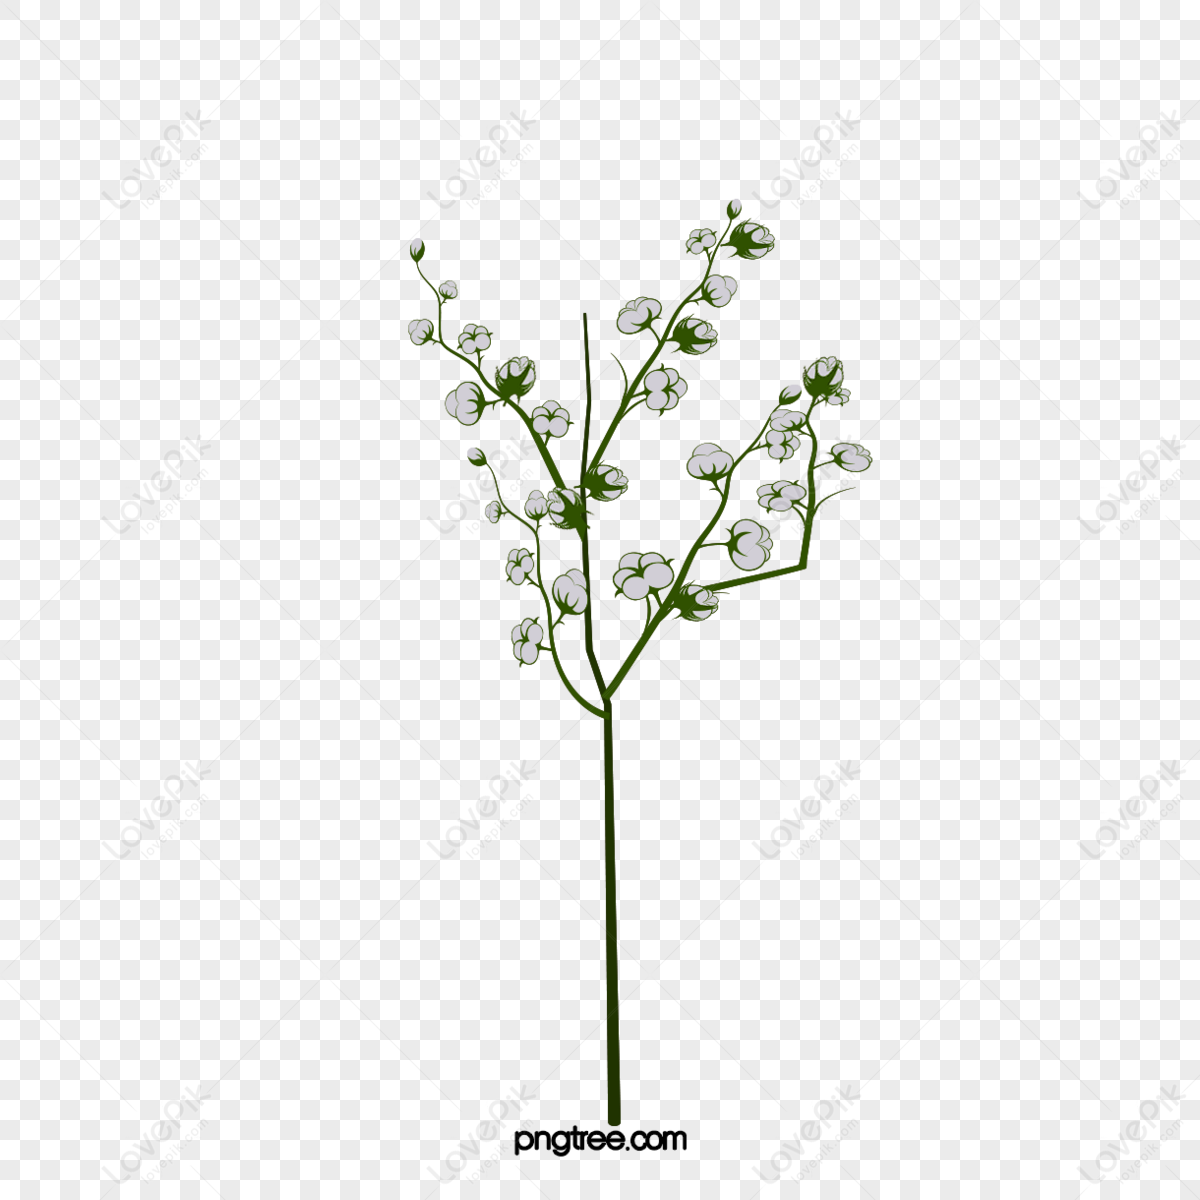 Starry Flowers PNG Images With Transparent Background